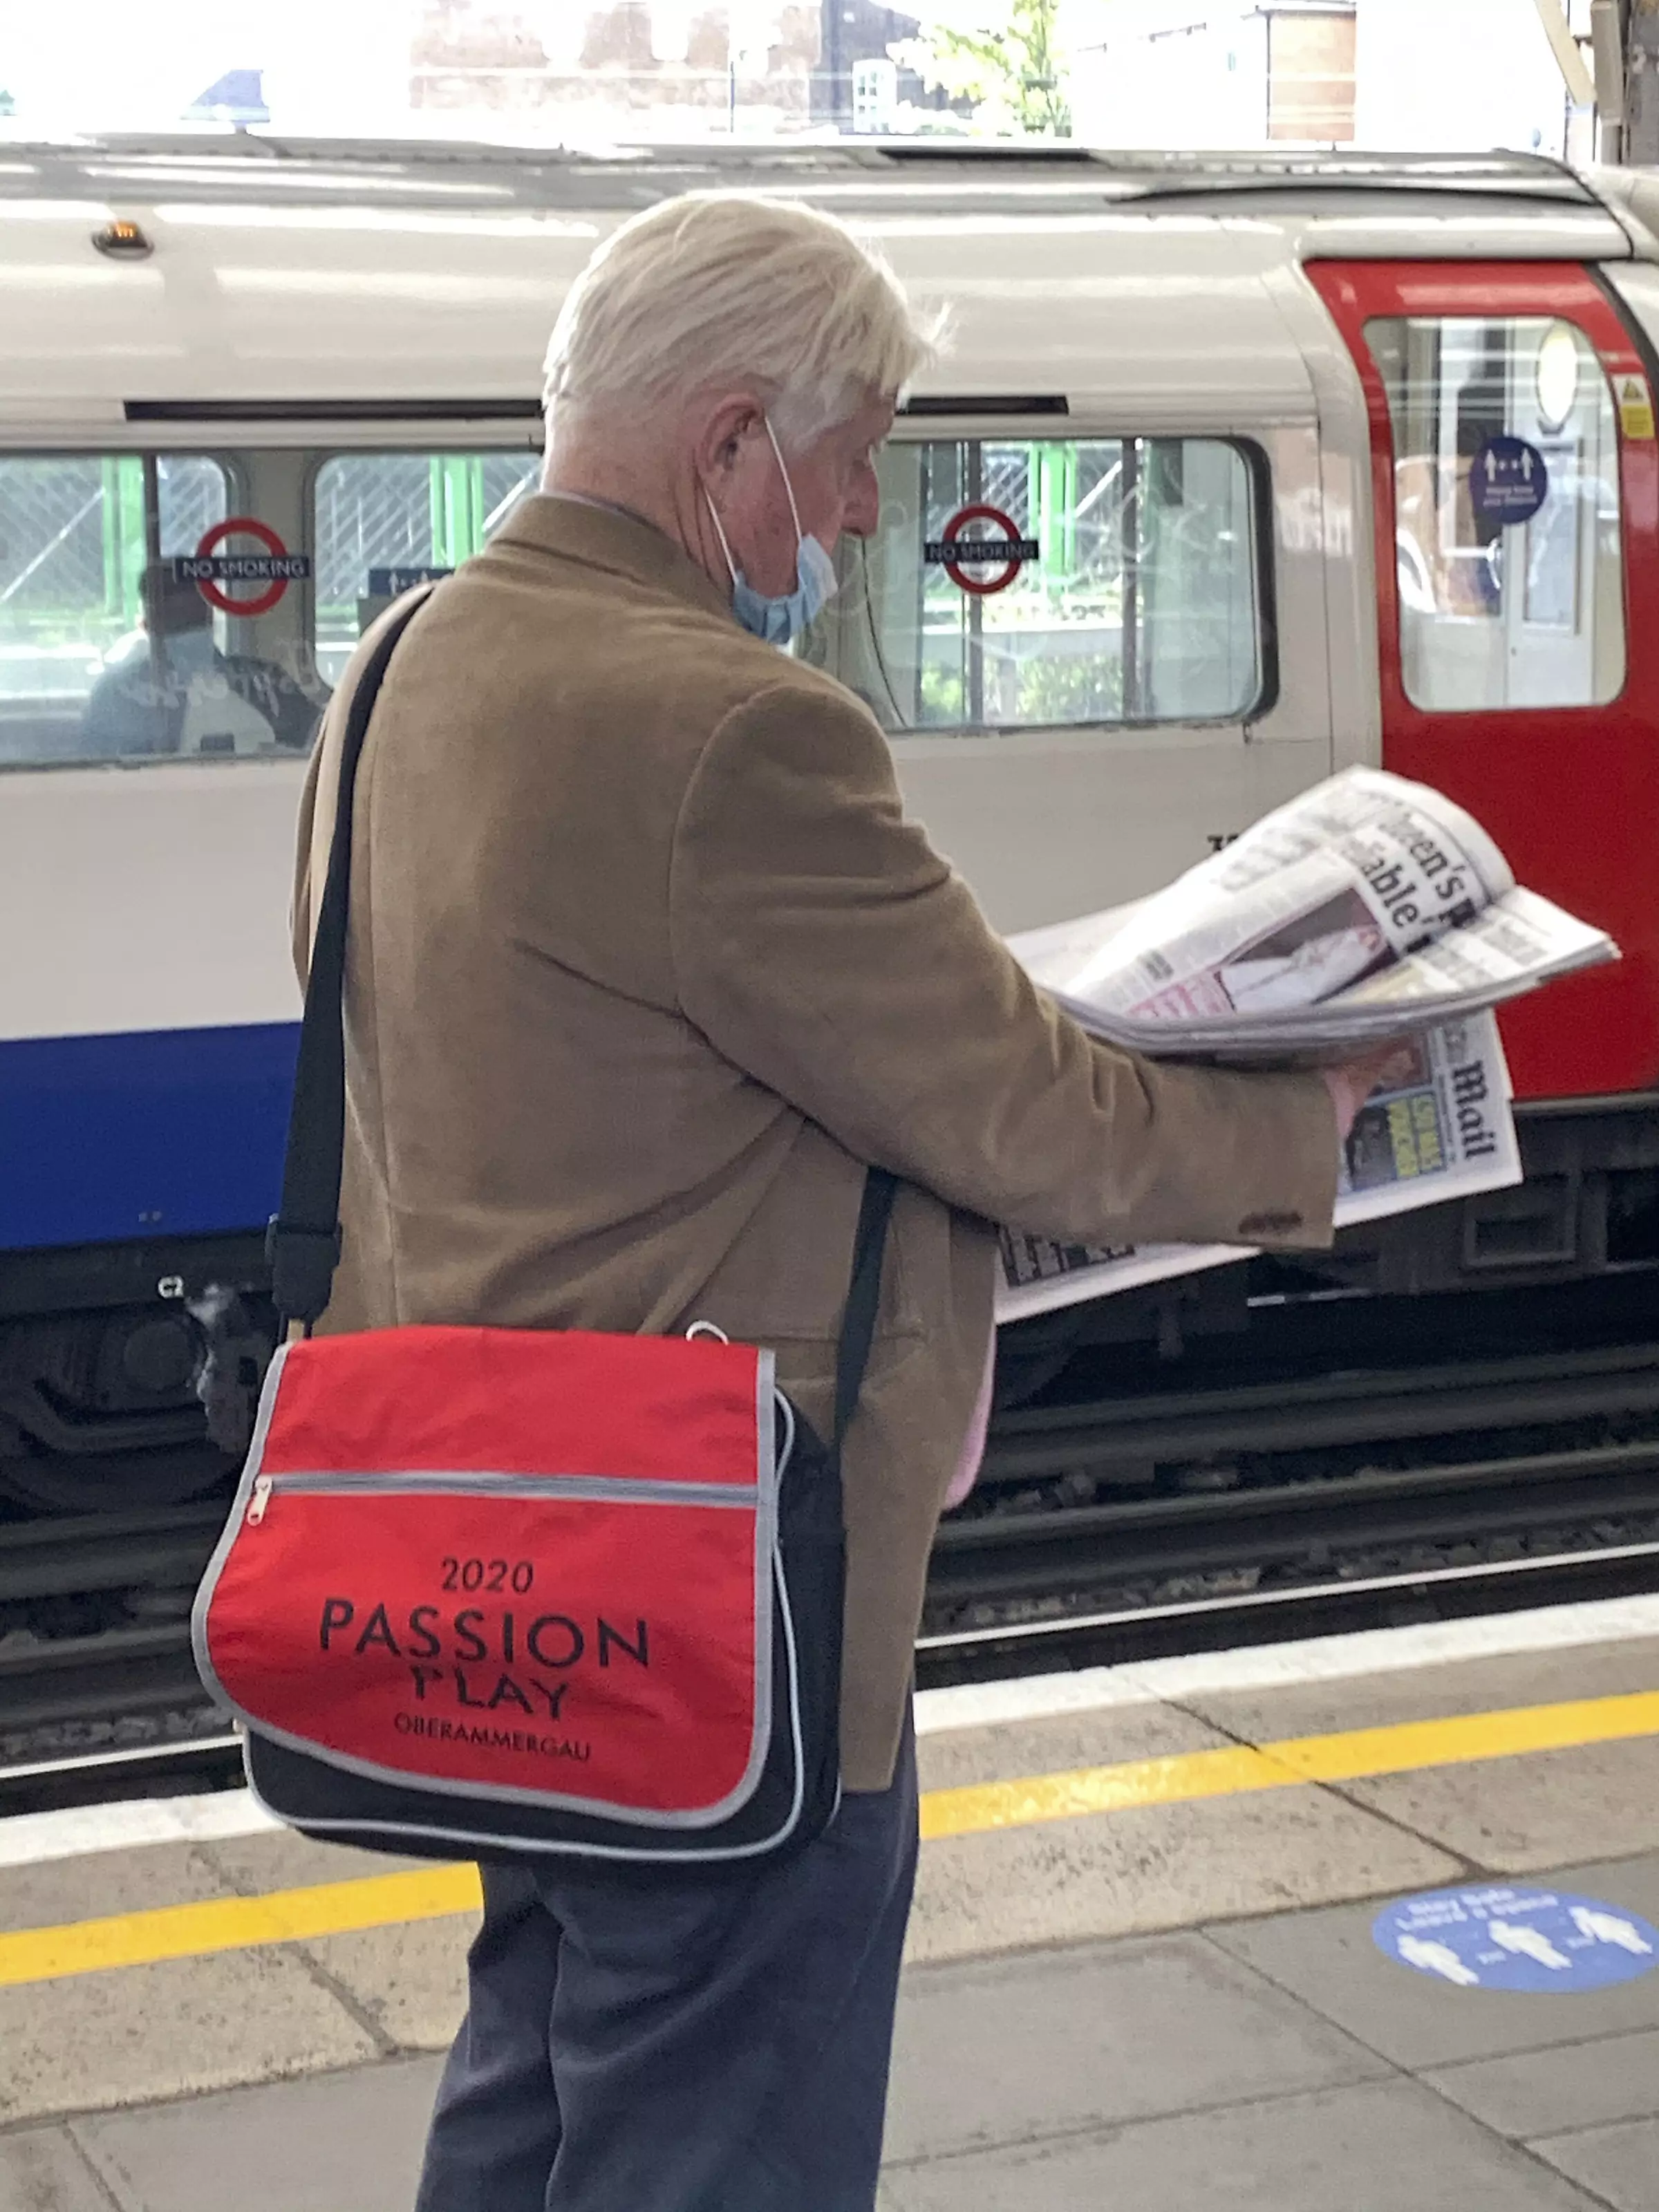 Johnson was spotted at a tube station not wearing his mask properly.